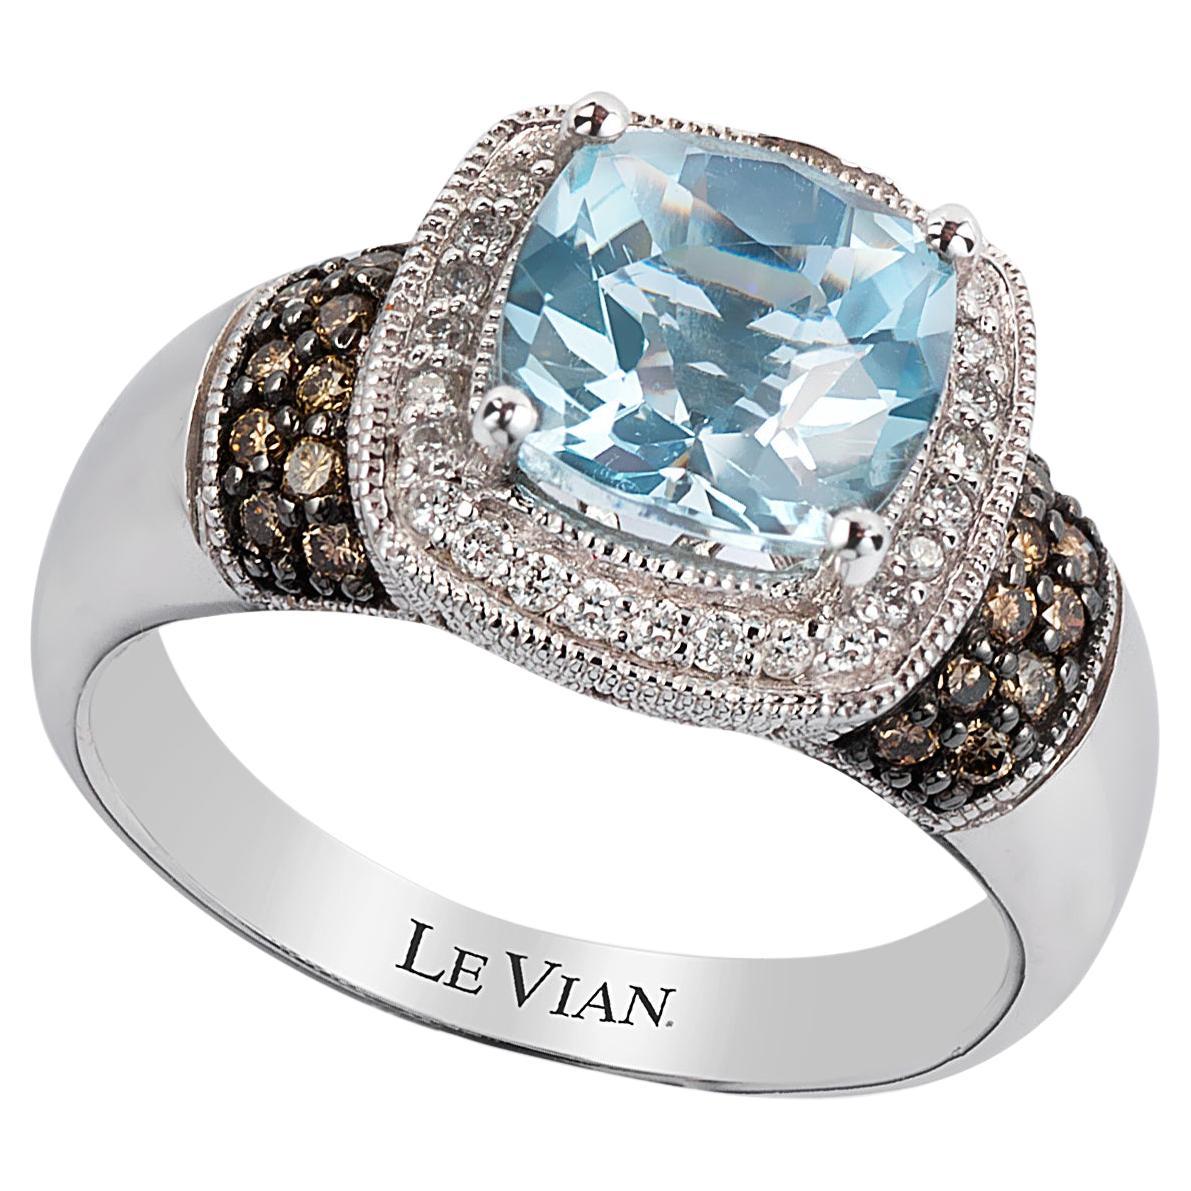 Le Vian 14K White Gold Aquamarine Round Chocolate Brown Diamond Cocktail Ring For Sale